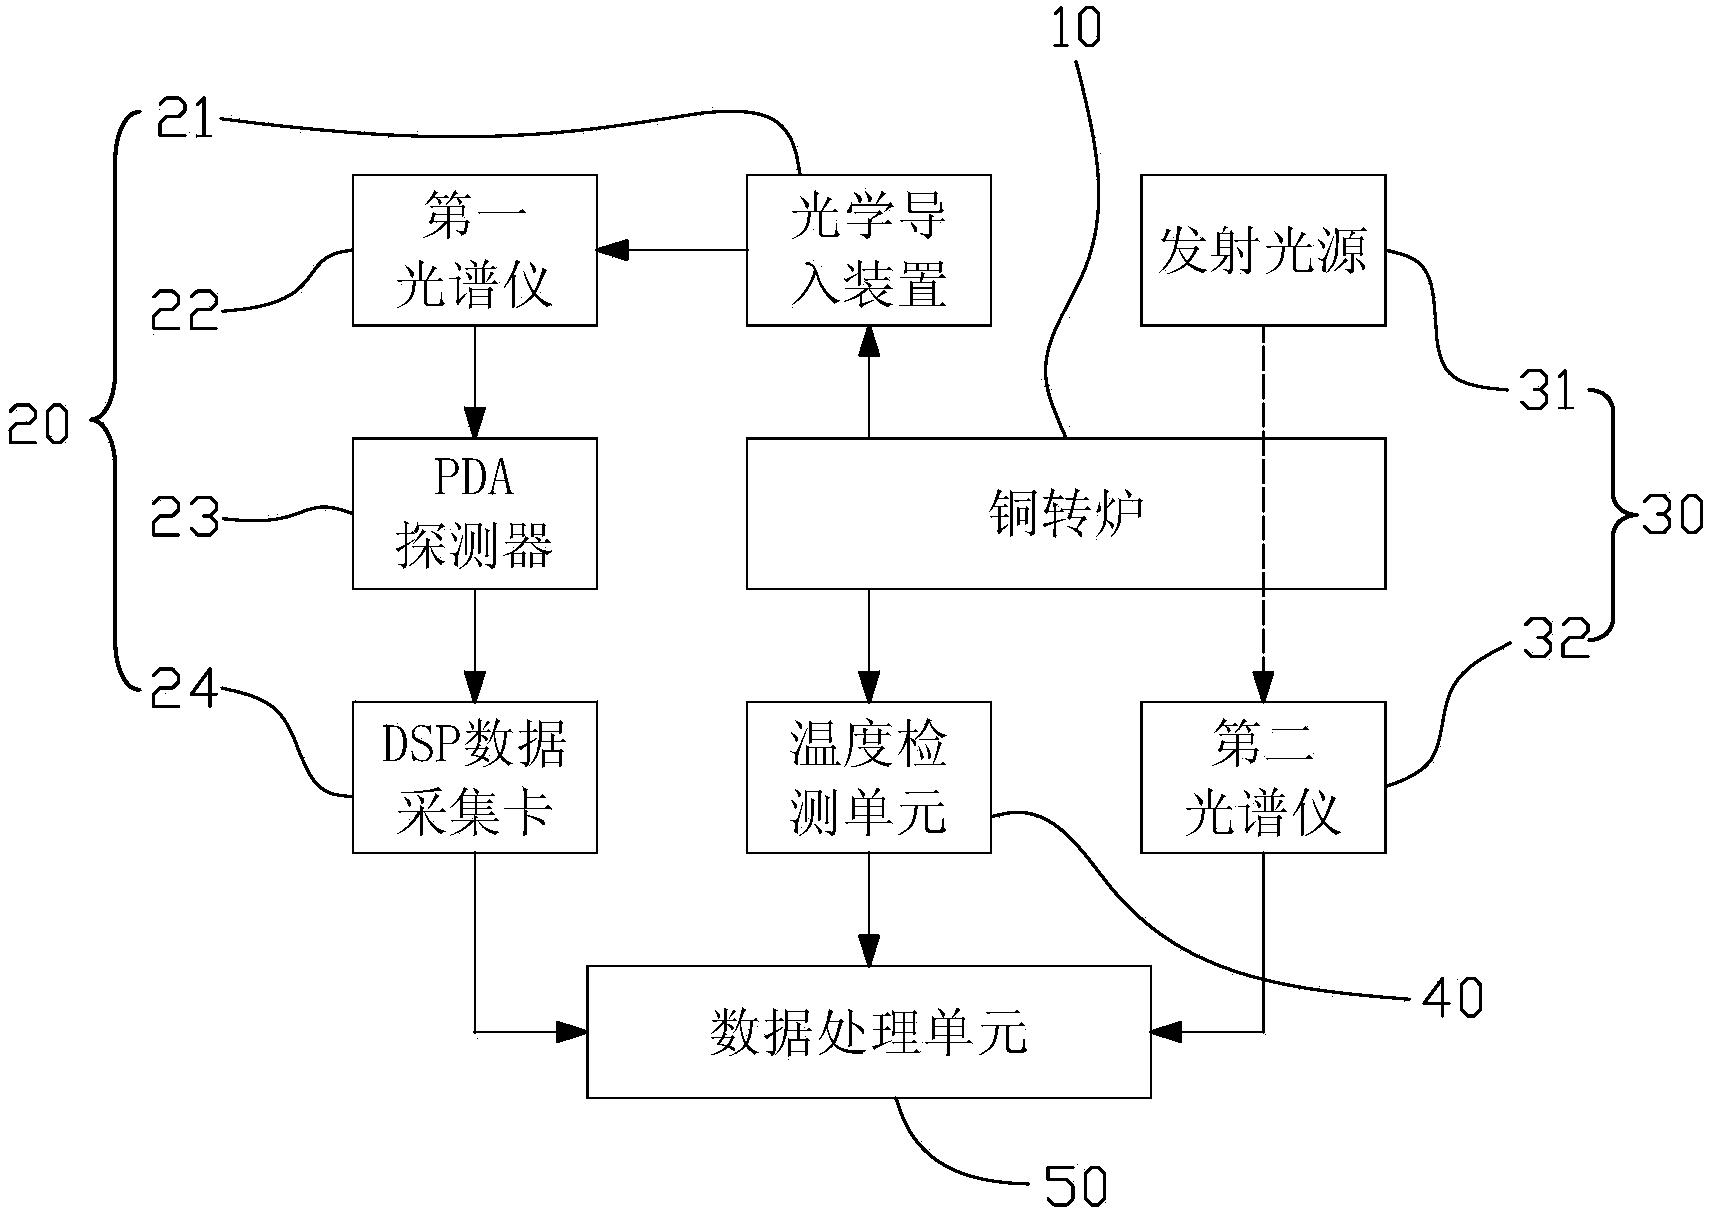 Control system for blowing of copper converter